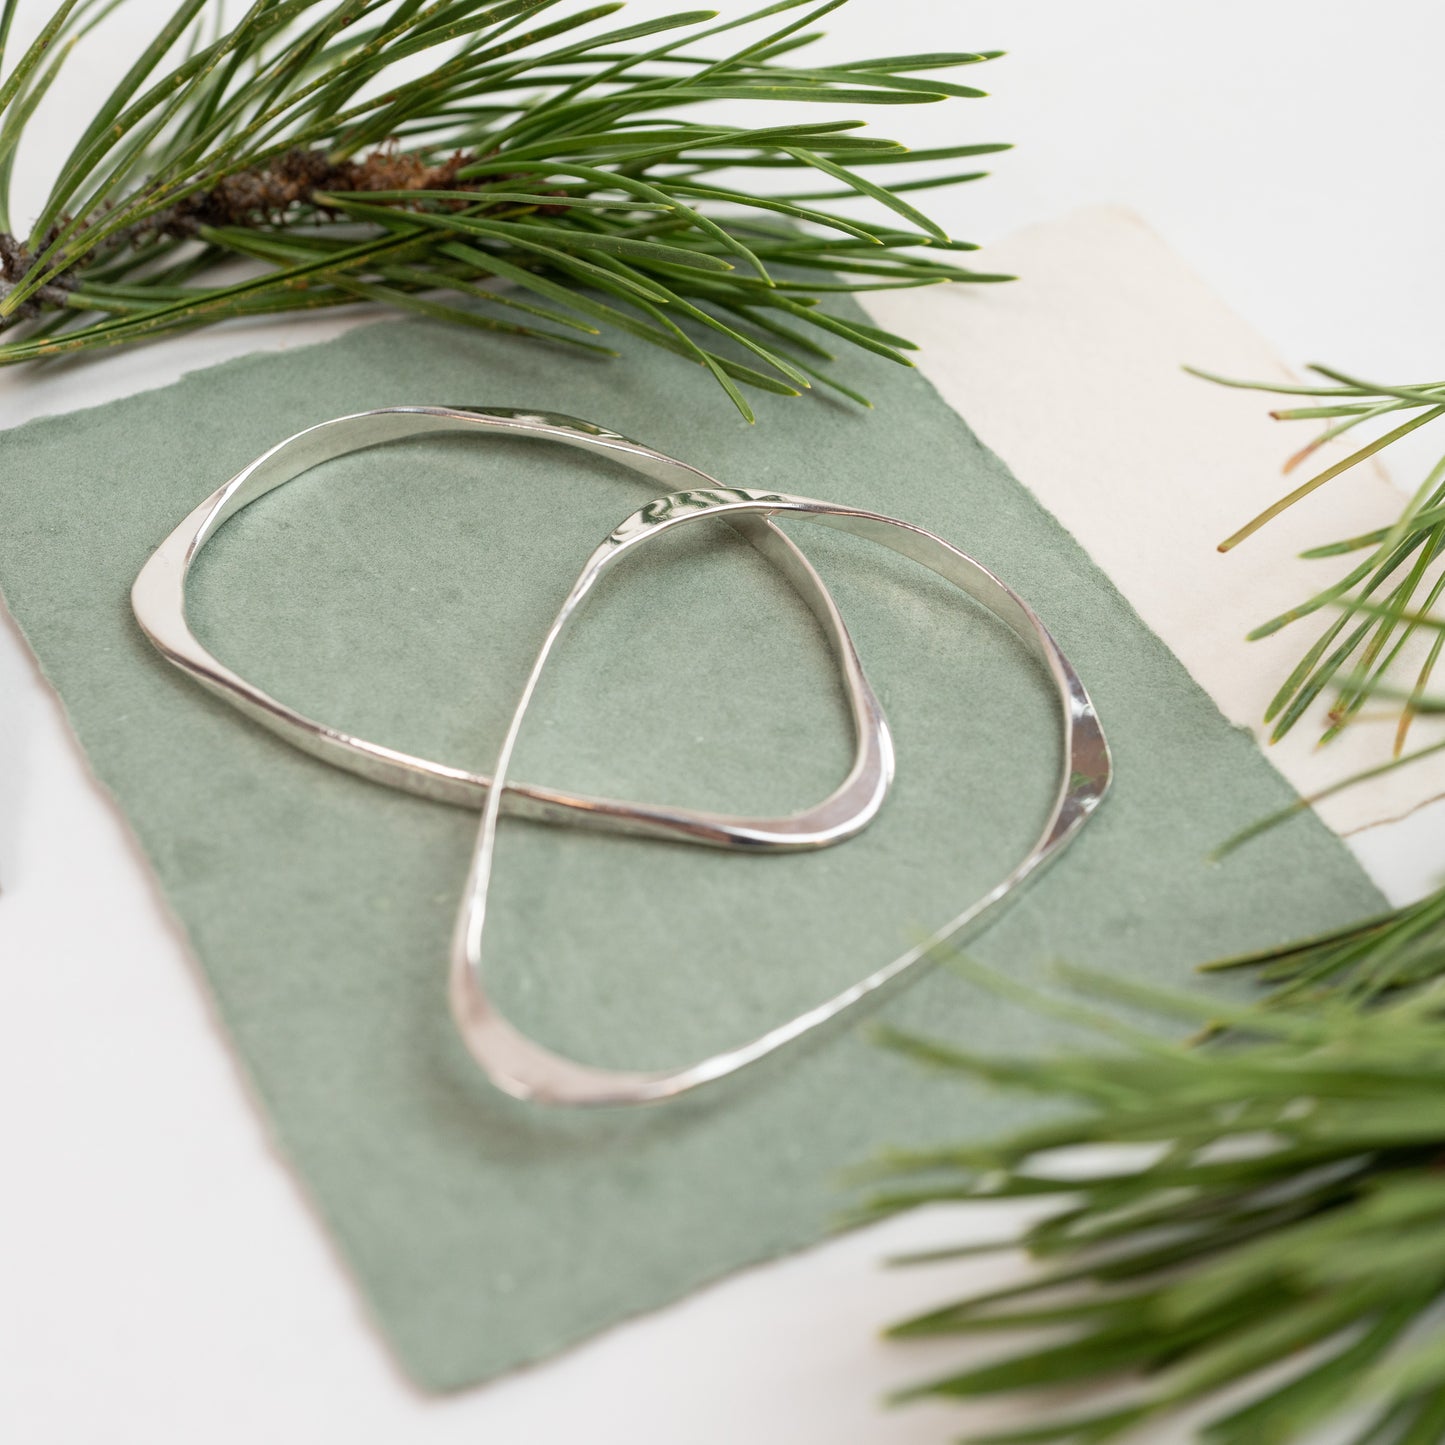 Bangle Bracelets - Sterling Silver - hand forged Three Way - Light 12 gauge and Heavy 8 gauge